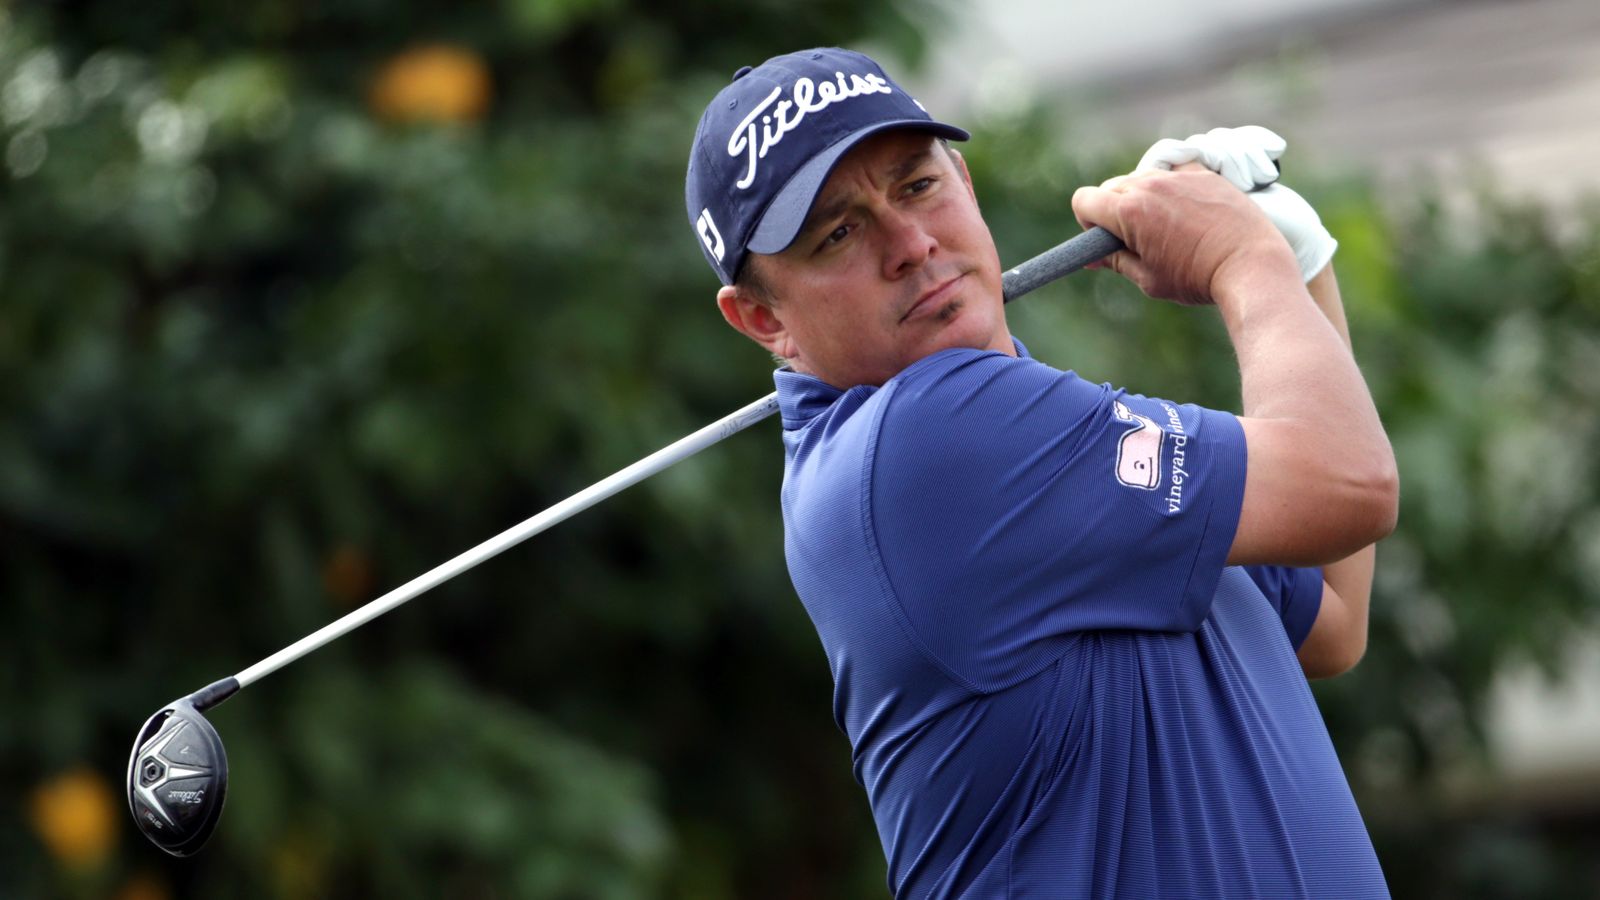 Jason Dufner surges into lead at CareerBuilder Challenge in California.